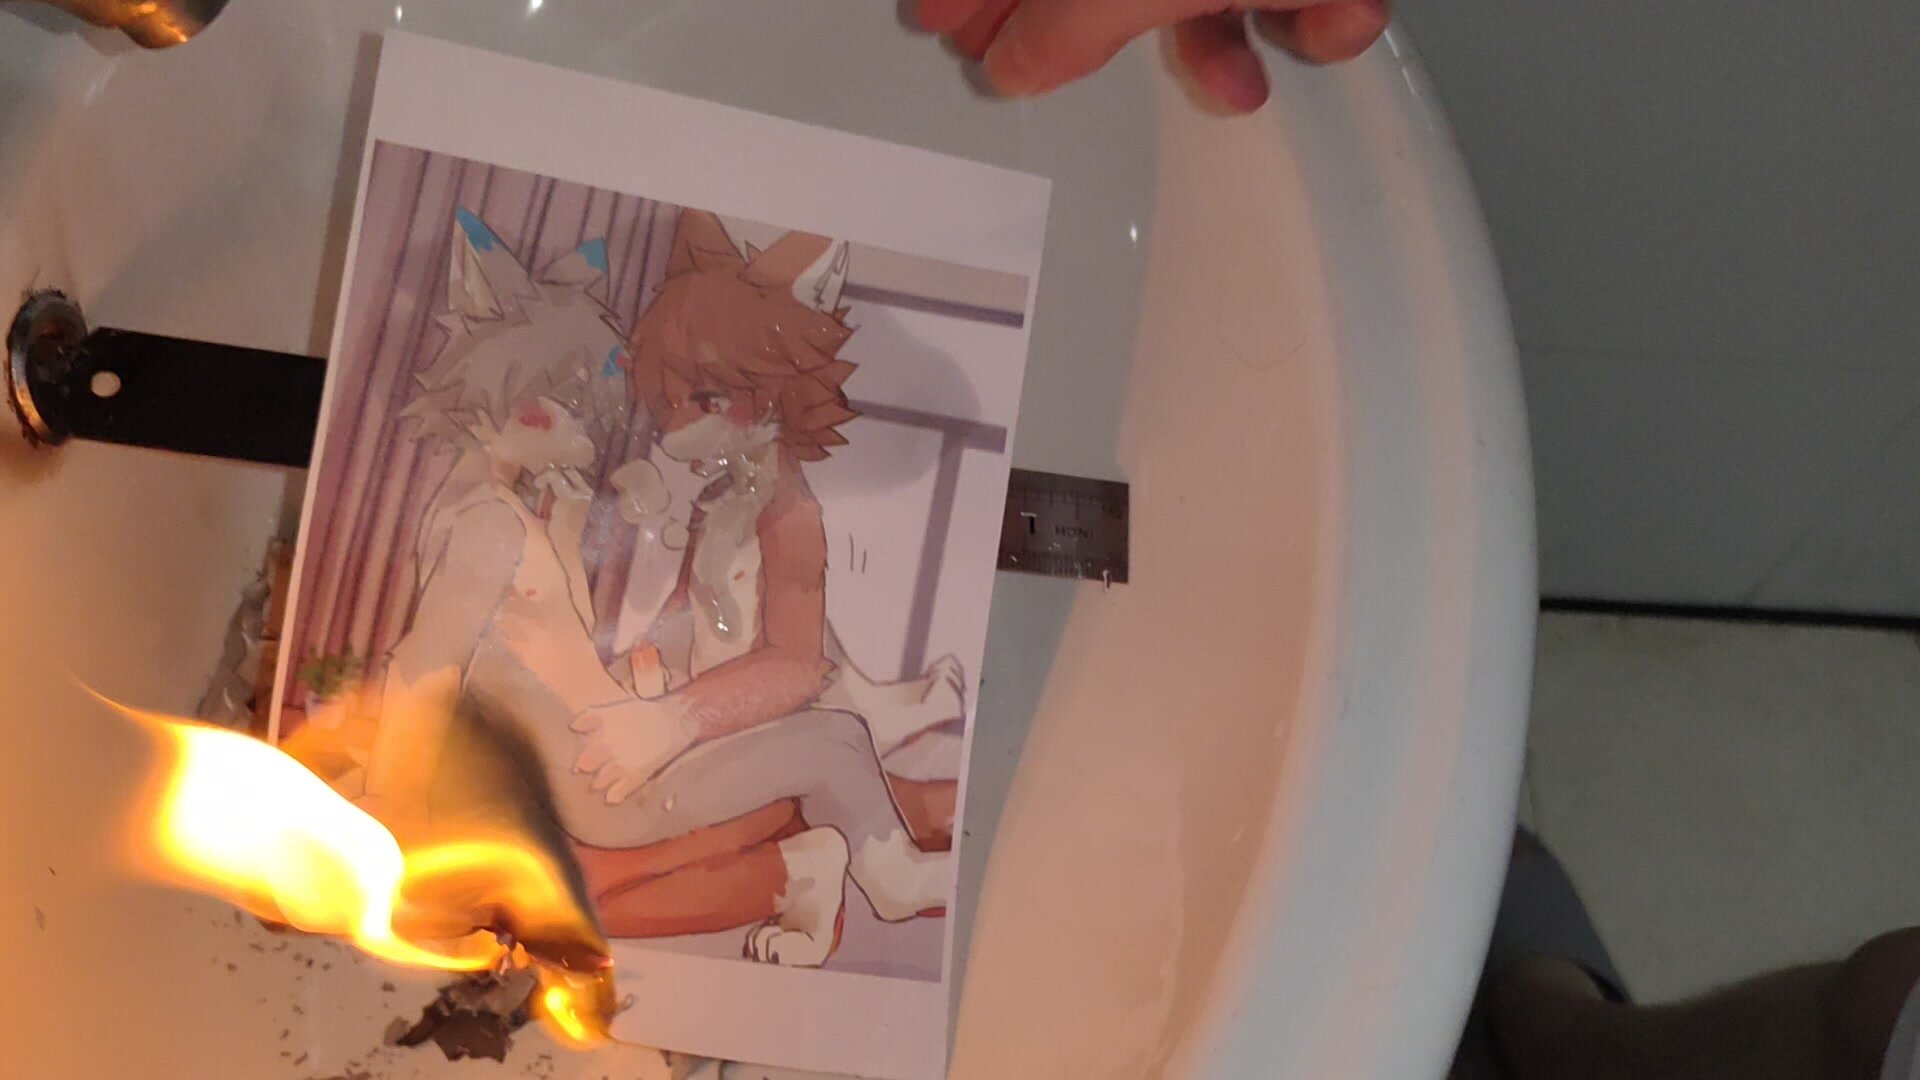 Enjoy the process of incinerating the Furry picture - video 16